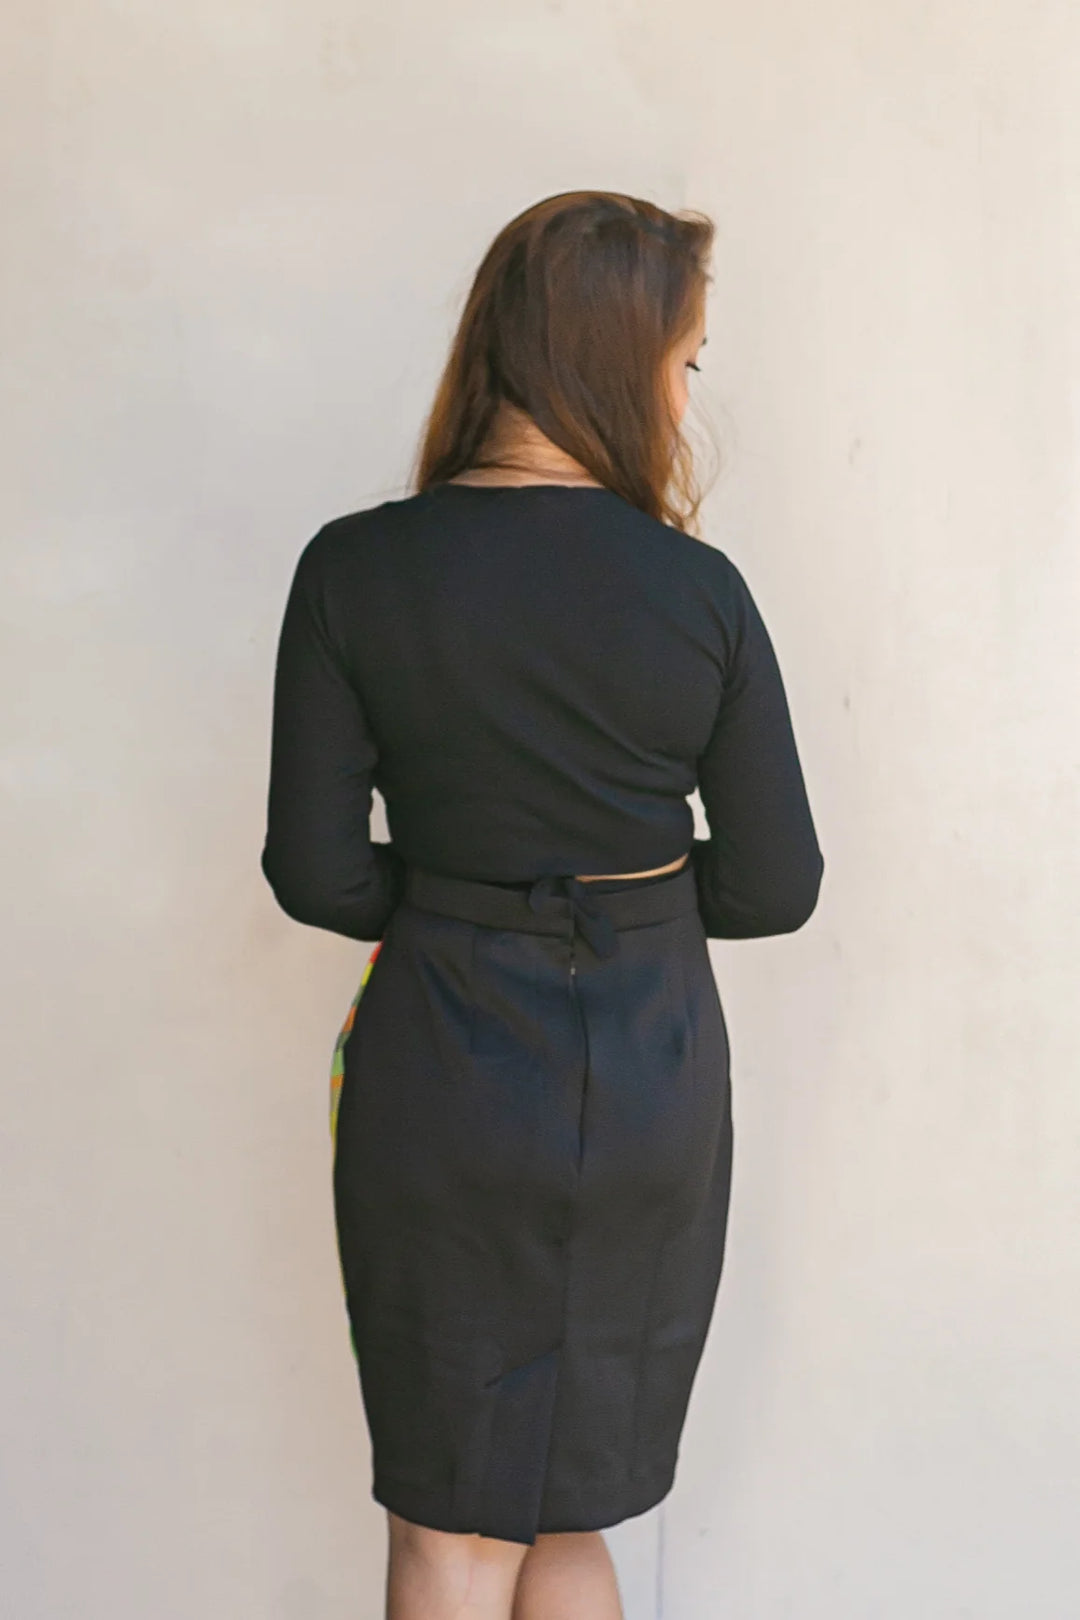 ANTHILL Fabric Gallery Alon Pencil Skirt